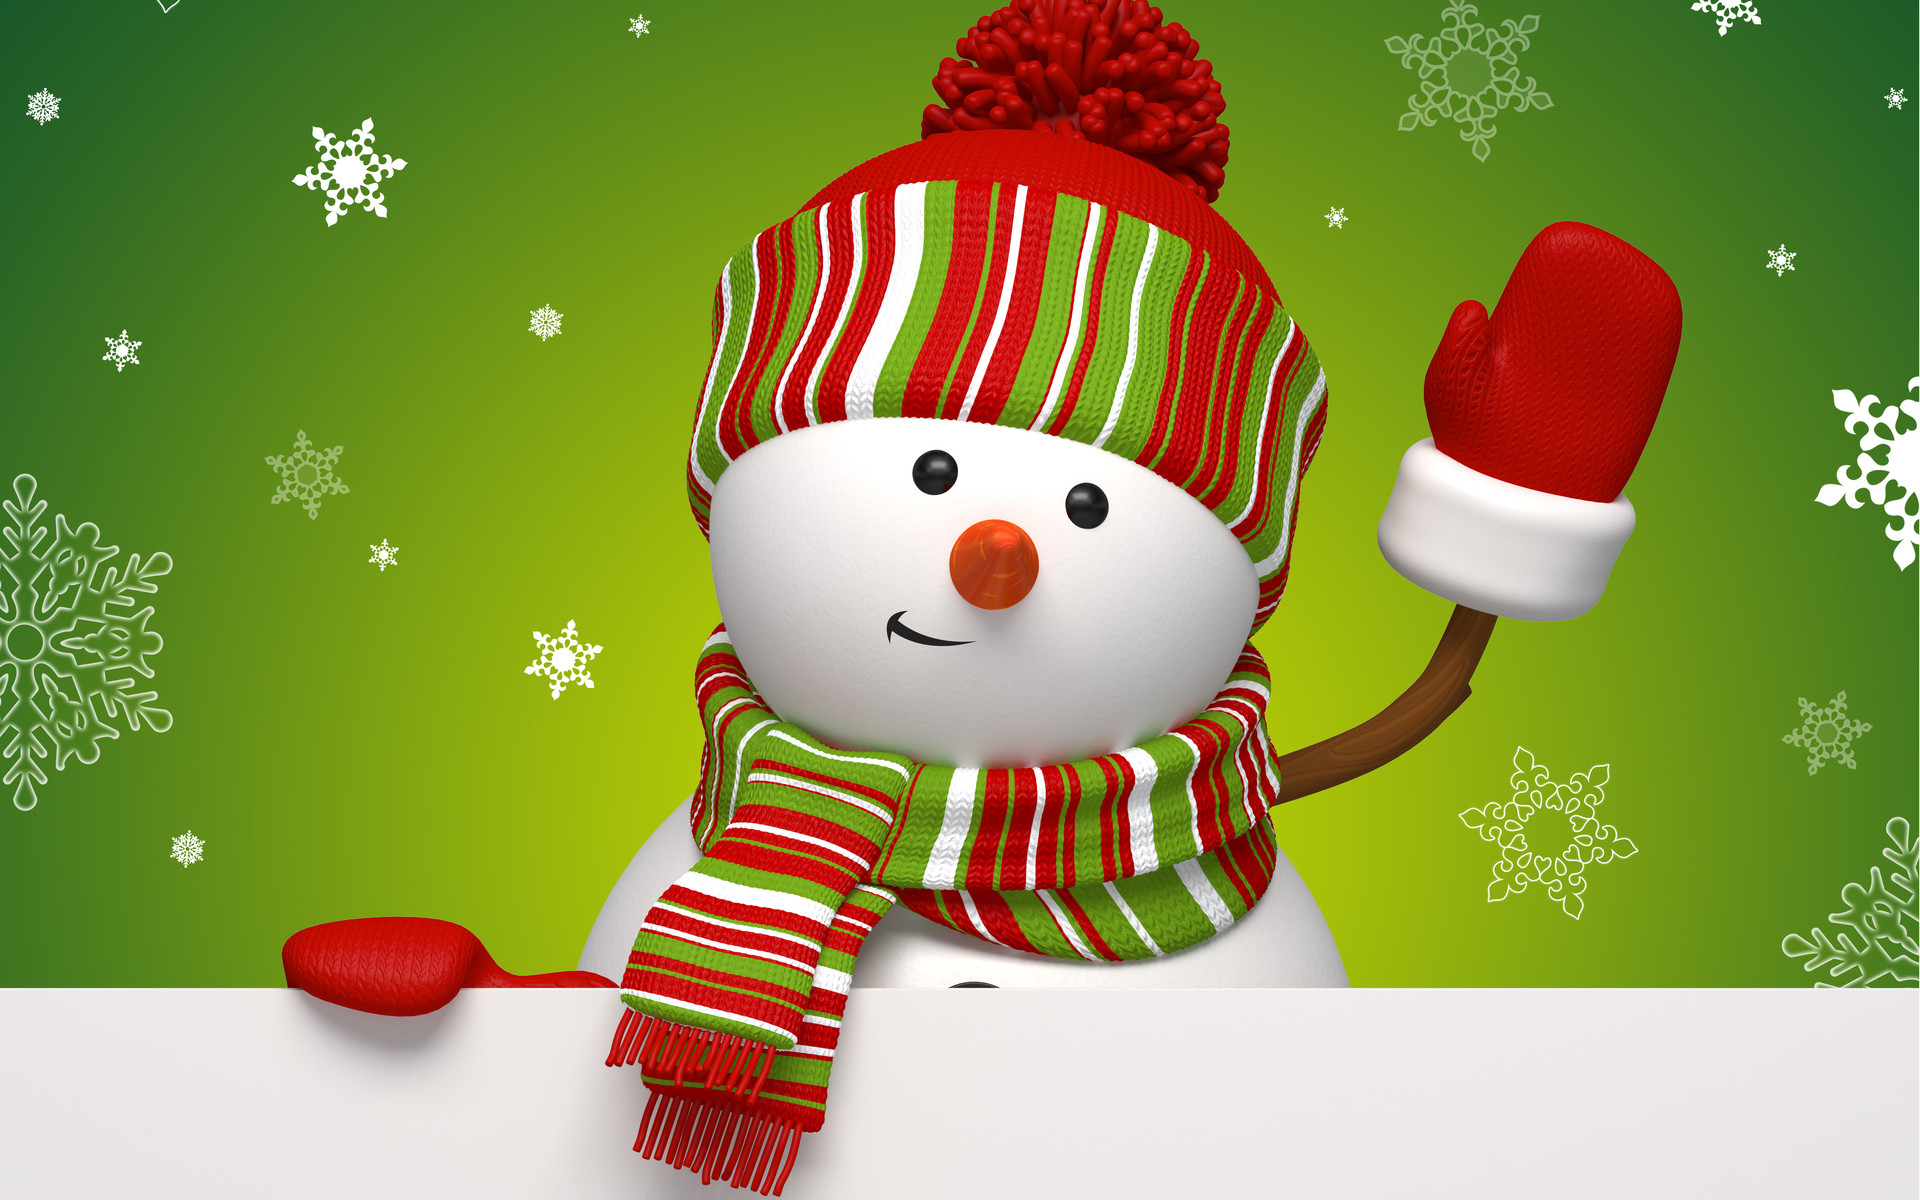 Cute Christmas Wallpapers and Screensavers (63+ images)